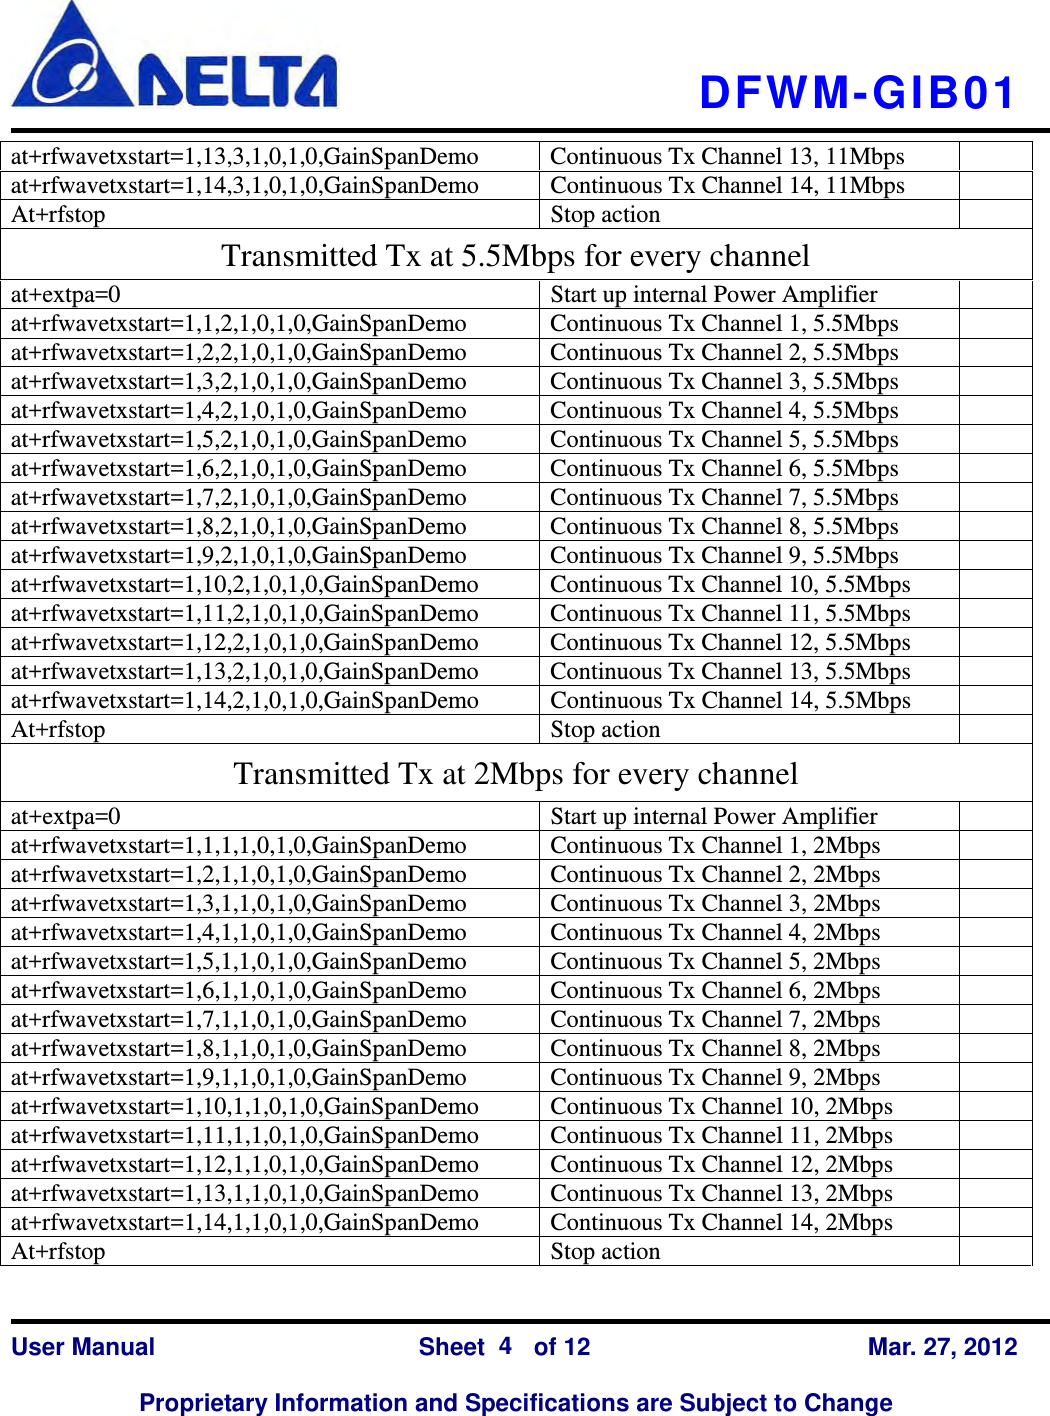   DFWM-GIB01    User Manual                Sheet    of 12      Mar. 27, 2012  Proprietary Information and Specifications are Subject to Change 4 at+rfwavetxstart=1,13,3,1,0,1,0,GainSpanDemo  Continuous Tx Channel 13, 11Mbps   at+rfwavetxstart=1,14,3,1,0,1,0,GainSpanDemo  Continuous Tx Channel 14, 11Mbps   At+rfstop Stop action  Transmitted Tx at 5.5Mbps for every channel at+extpa=0  Start up internal Power Amplifier   at+rfwavetxstart=1,1,2,1,0,1,0,GainSpanDemo  Continuous Tx Channel 1, 5.5Mbps   at+rfwavetxstart=1,2,2,1,0,1,0,GainSpanDemo  Continuous Tx Channel 2, 5.5Mbps   at+rfwavetxstart=1,3,2,1,0,1,0,GainSpanDemo  Continuous Tx Channel 3, 5.5Mbps   at+rfwavetxstart=1,4,2,1,0,1,0,GainSpanDemo  Continuous Tx Channel 4, 5.5Mbps   at+rfwavetxstart=1,5,2,1,0,1,0,GainSpanDemo  Continuous Tx Channel 5, 5.5Mbps   at+rfwavetxstart=1,6,2,1,0,1,0,GainSpanDemo  Continuous Tx Channel 6, 5.5Mbps   at+rfwavetxstart=1,7,2,1,0,1,0,GainSpanDemo  Continuous Tx Channel 7, 5.5Mbps   at+rfwavetxstart=1,8,2,1,0,1,0,GainSpanDemo  Continuous Tx Channel 8, 5.5Mbps   at+rfwavetxstart=1,9,2,1,0,1,0,GainSpanDemo  Continuous Tx Channel 9, 5.5Mbps   at+rfwavetxstart=1,10,2,1,0,1,0,GainSpanDemo  Continuous Tx Channel 10, 5.5Mbps   at+rfwavetxstart=1,11,2,1,0,1,0,GainSpanDemo  Continuous Tx Channel 11, 5.5Mbps   at+rfwavetxstart=1,12,2,1,0,1,0,GainSpanDemo  Continuous Tx Channel 12, 5.5Mbps   at+rfwavetxstart=1,13,2,1,0,1,0,GainSpanDemo  Continuous Tx Channel 13, 5.5Mbps   at+rfwavetxstart=1,14,2,1,0,1,0,GainSpanDemo  Continuous Tx Channel 14, 5.5Mbps   At+rfstop Stop action  Transmitted Tx at 2Mbps for every channel at+extpa=0  Start up internal Power Amplifier   at+rfwavetxstart=1,1,1,1,0,1,0,GainSpanDemo  Continuous Tx Channel 1, 2Mbps   at+rfwavetxstart=1,2,1,1,0,1,0,GainSpanDemo  Continuous Tx Channel 2, 2Mbps   at+rfwavetxstart=1,3,1,1,0,1,0,GainSpanDemo  Continuous Tx Channel 3, 2Mbps   at+rfwavetxstart=1,4,1,1,0,1,0,GainSpanDemo  Continuous Tx Channel 4, 2Mbps   at+rfwavetxstart=1,5,1,1,0,1,0,GainSpanDemo  Continuous Tx Channel 5, 2Mbps   at+rfwavetxstart=1,6,1,1,0,1,0,GainSpanDemo  Continuous Tx Channel 6, 2Mbps   at+rfwavetxstart=1,7,1,1,0,1,0,GainSpanDemo  Continuous Tx Channel 7, 2Mbps   at+rfwavetxstart=1,8,1,1,0,1,0,GainSpanDemo  Continuous Tx Channel 8, 2Mbps   at+rfwavetxstart=1,9,1,1,0,1,0,GainSpanDemo  Continuous Tx Channel 9, 2Mbps   at+rfwavetxstart=1,10,1,1,0,1,0,GainSpanDemo  Continuous Tx Channel 10, 2Mbps   at+rfwavetxstart=1,11,1,1,0,1,0,GainSpanDemo  Continuous Tx Channel 11, 2Mbps   at+rfwavetxstart=1,12,1,1,0,1,0,GainSpanDemo  Continuous Tx Channel 12, 2Mbps   at+rfwavetxstart=1,13,1,1,0,1,0,GainSpanDemo  Continuous Tx Channel 13, 2Mbps   at+rfwavetxstart=1,14,1,1,0,1,0,GainSpanDemo  Continuous Tx Channel 14, 2Mbps   At+rfstop Stop action  